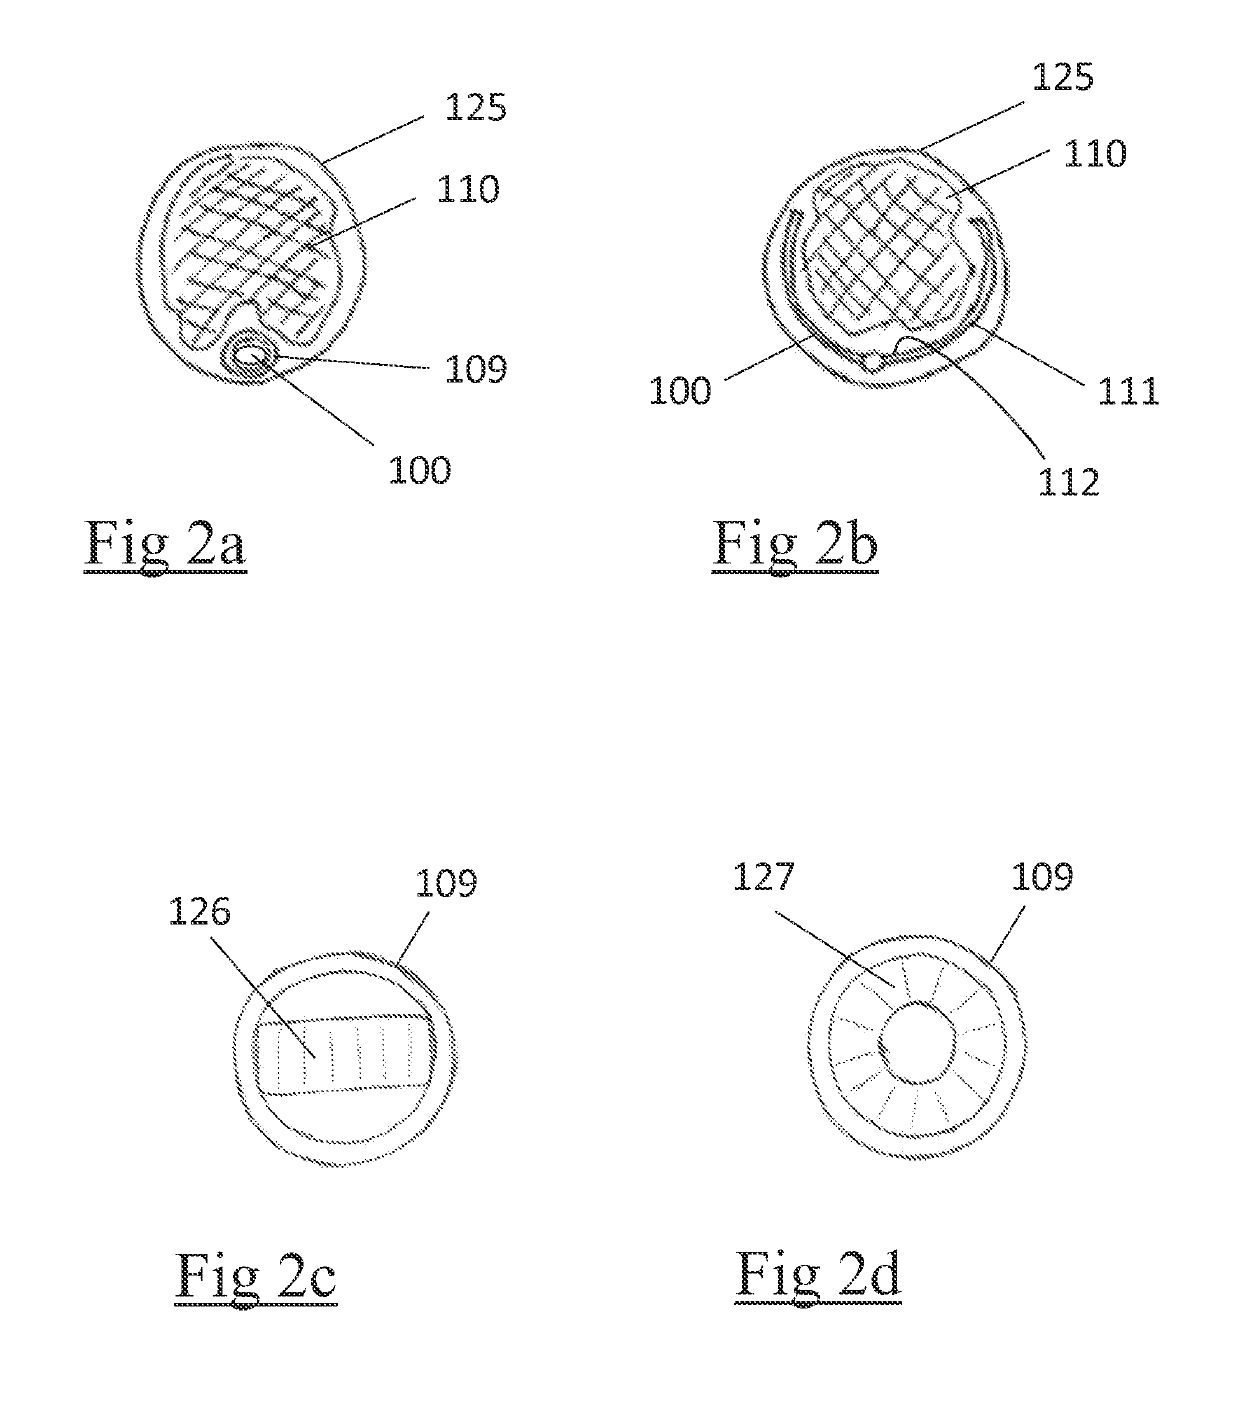 Clot retrieval device for removing occlusive clot from a blood vessel